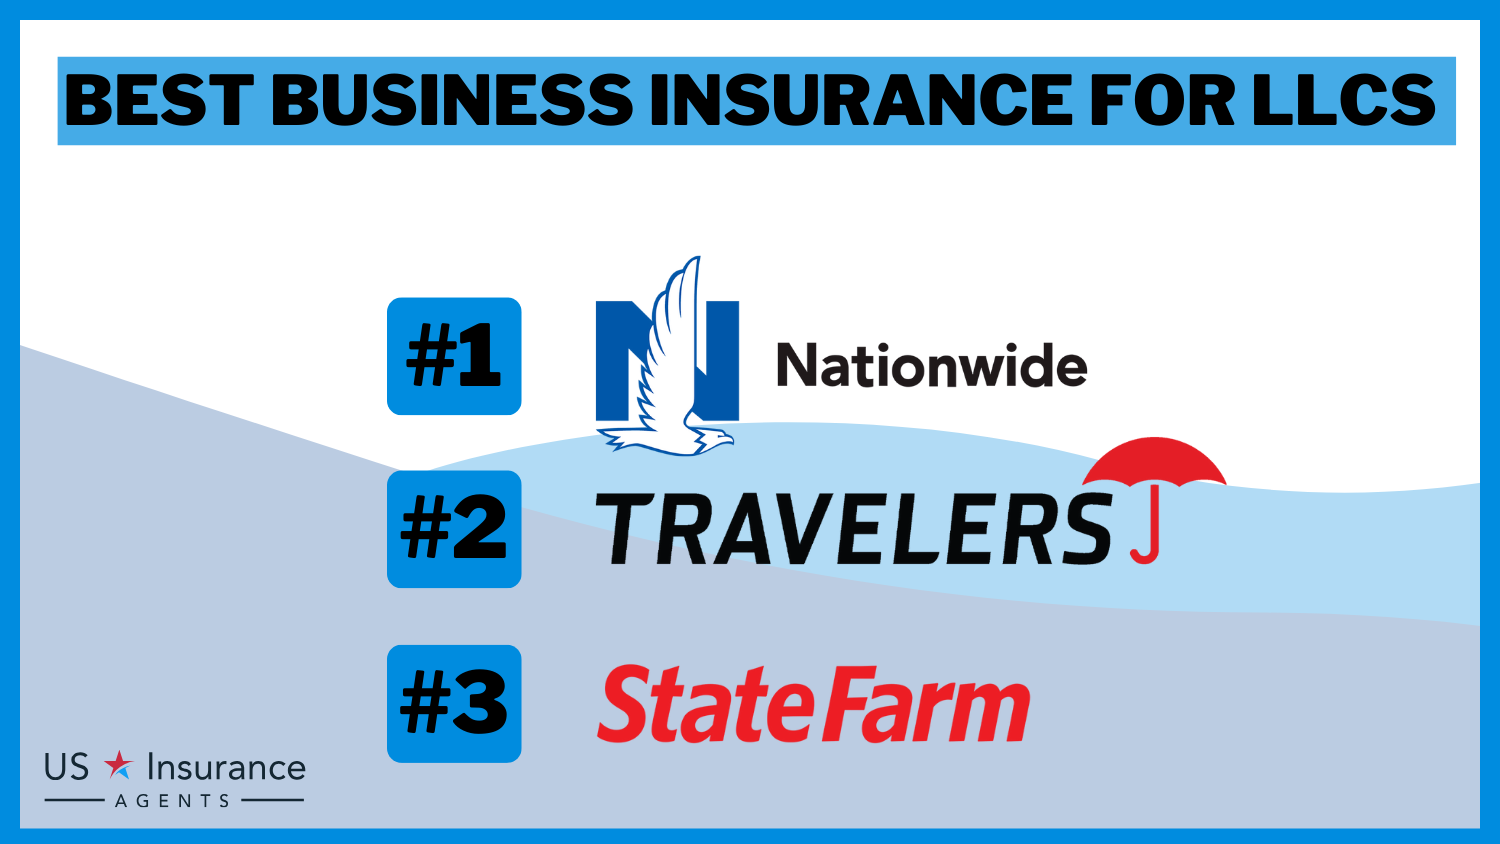 Nationwide, Travelers, State Farm: Best Business Insurance for LLCs